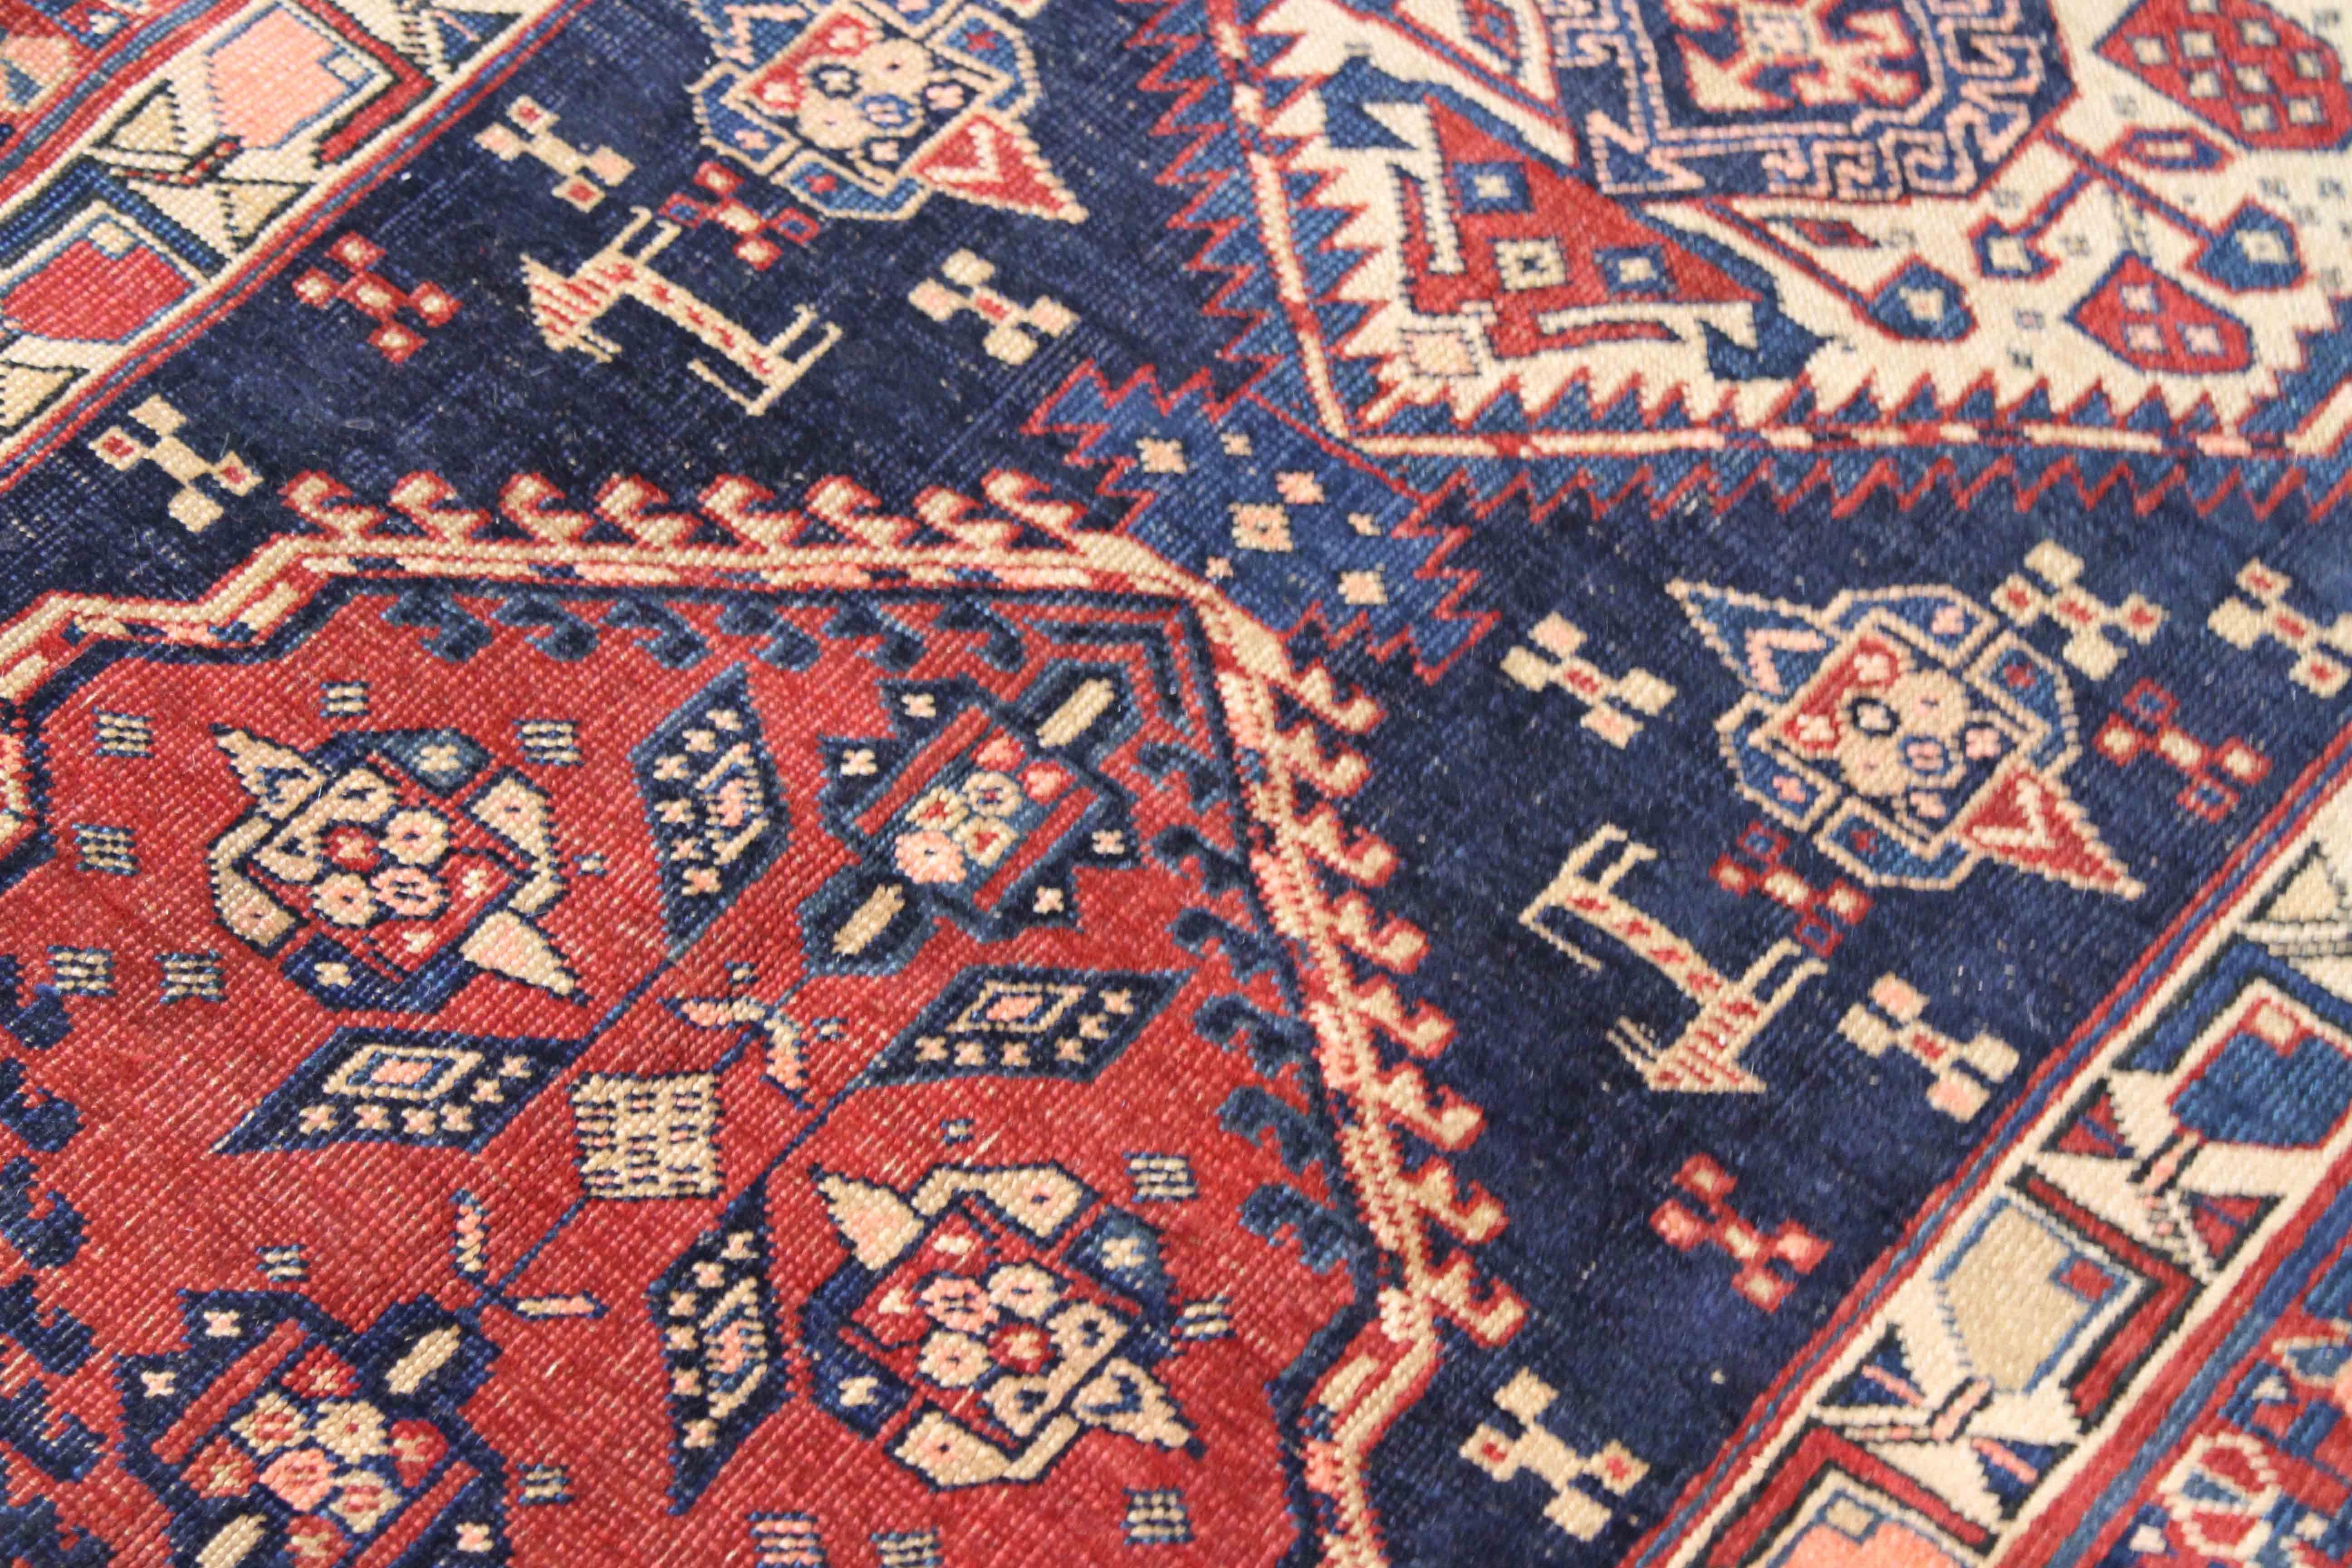 Hand-Knotted Antique Persian Rug Azerbaijan Design with Magnificent Jewel Patterns circa 1900 For Sale